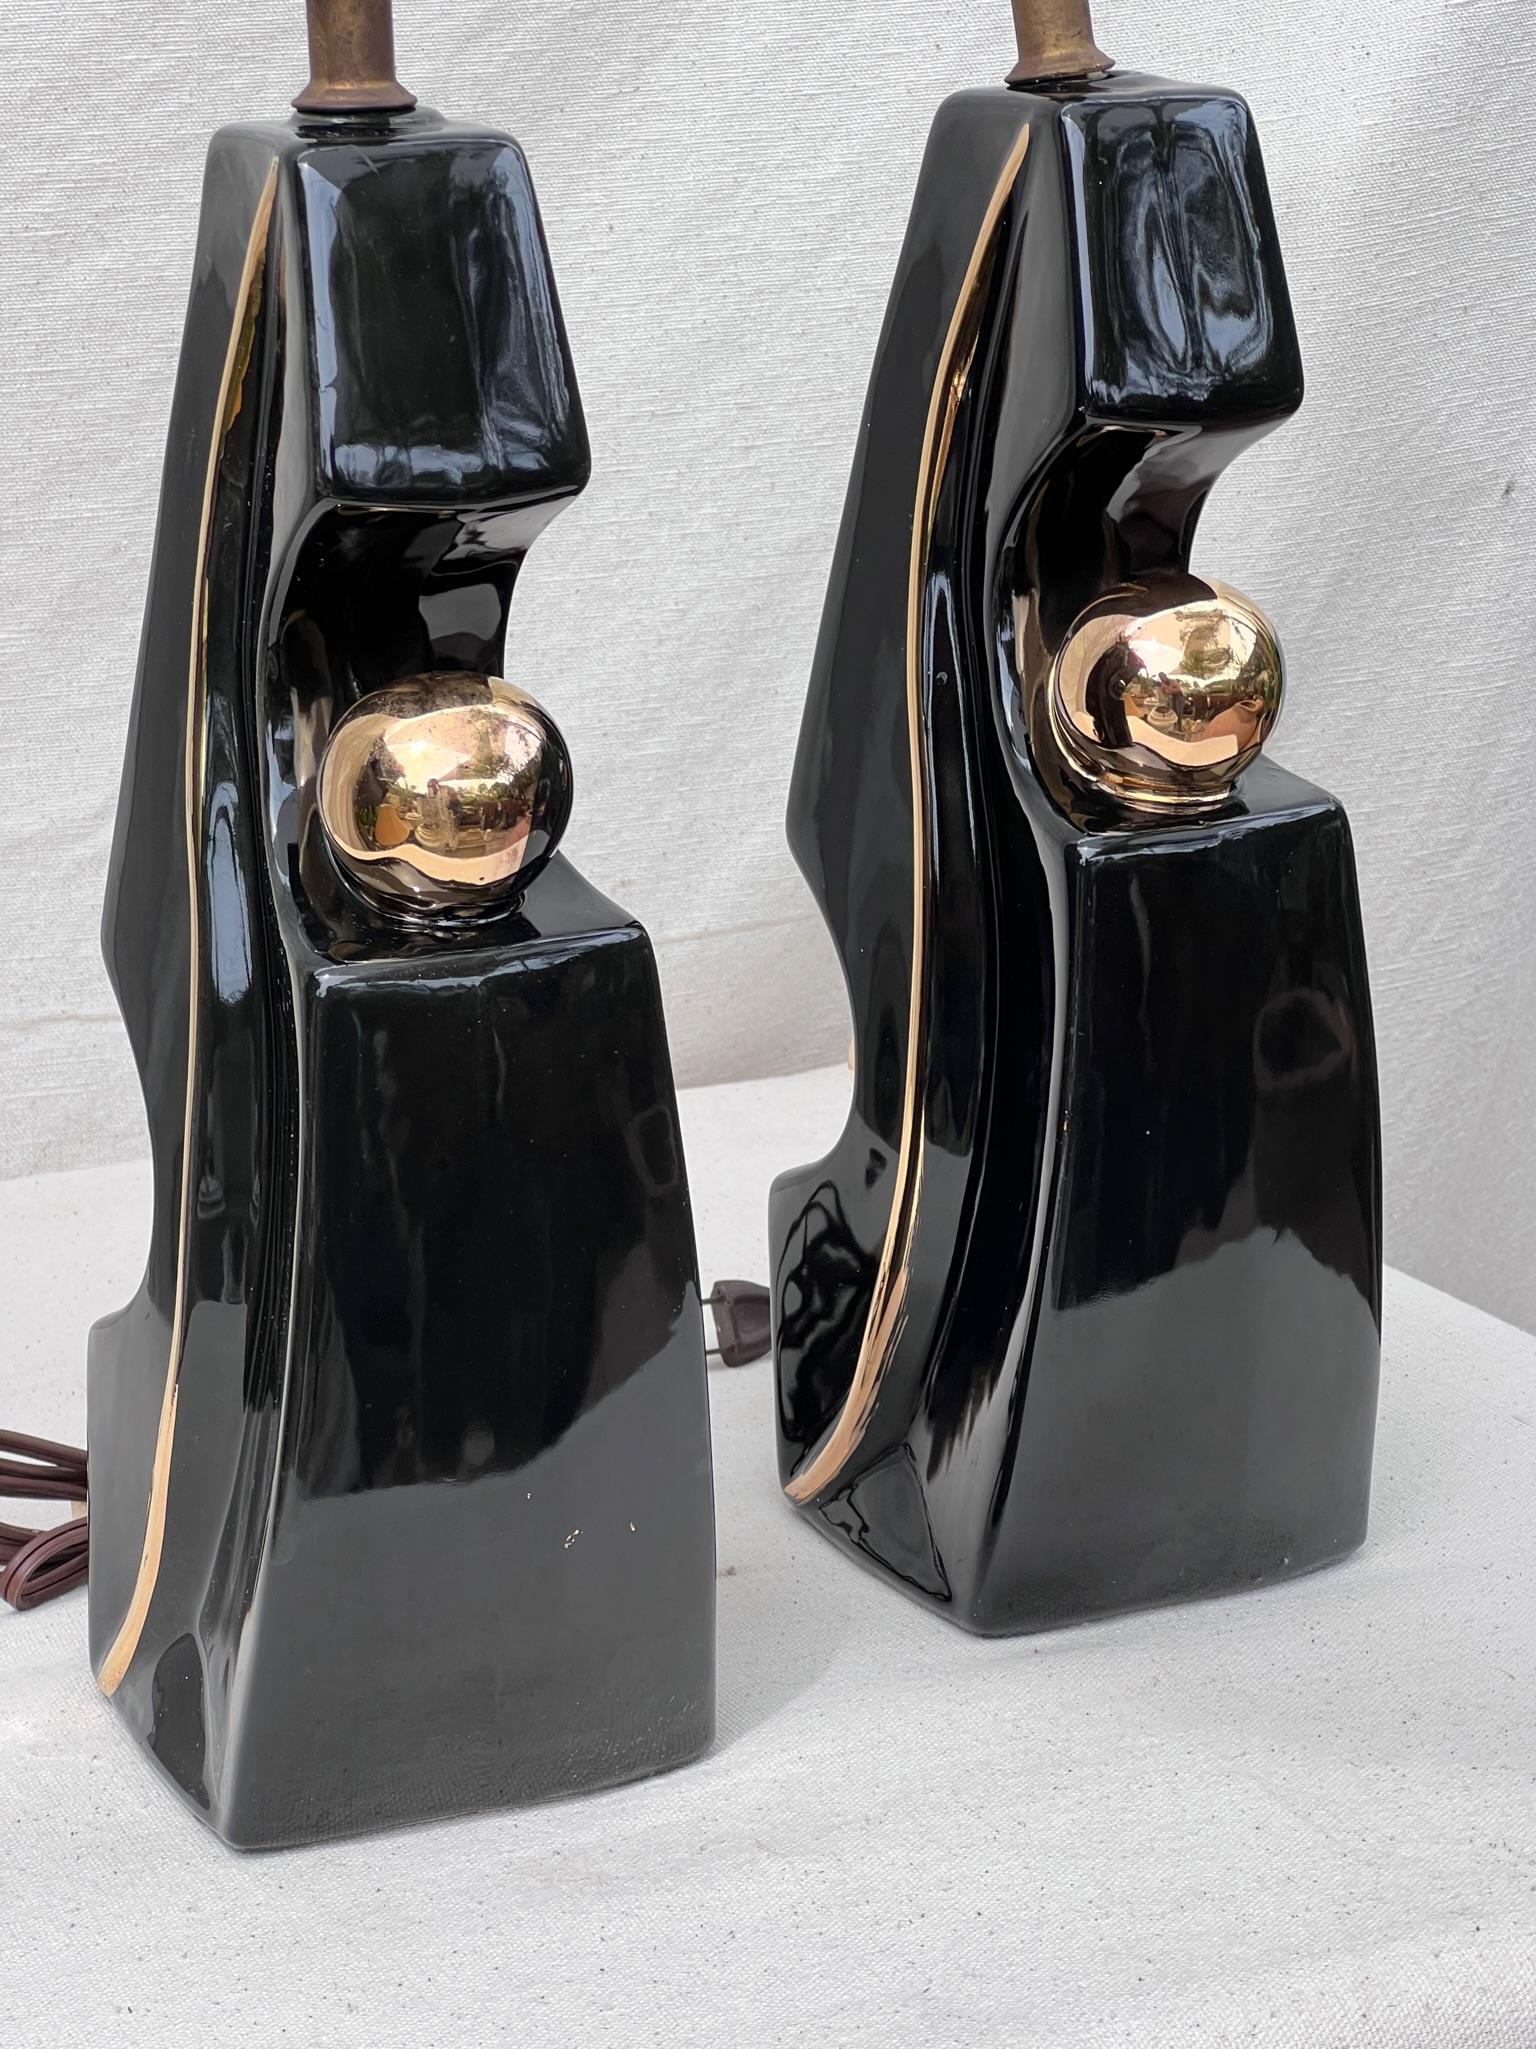 Our pair of mid-century modern glazed pottery table lamps takes inspiration from Picasso's distinctive style. These lamps showcase a harmonious blend of black and gold, adding a touch of opulence.